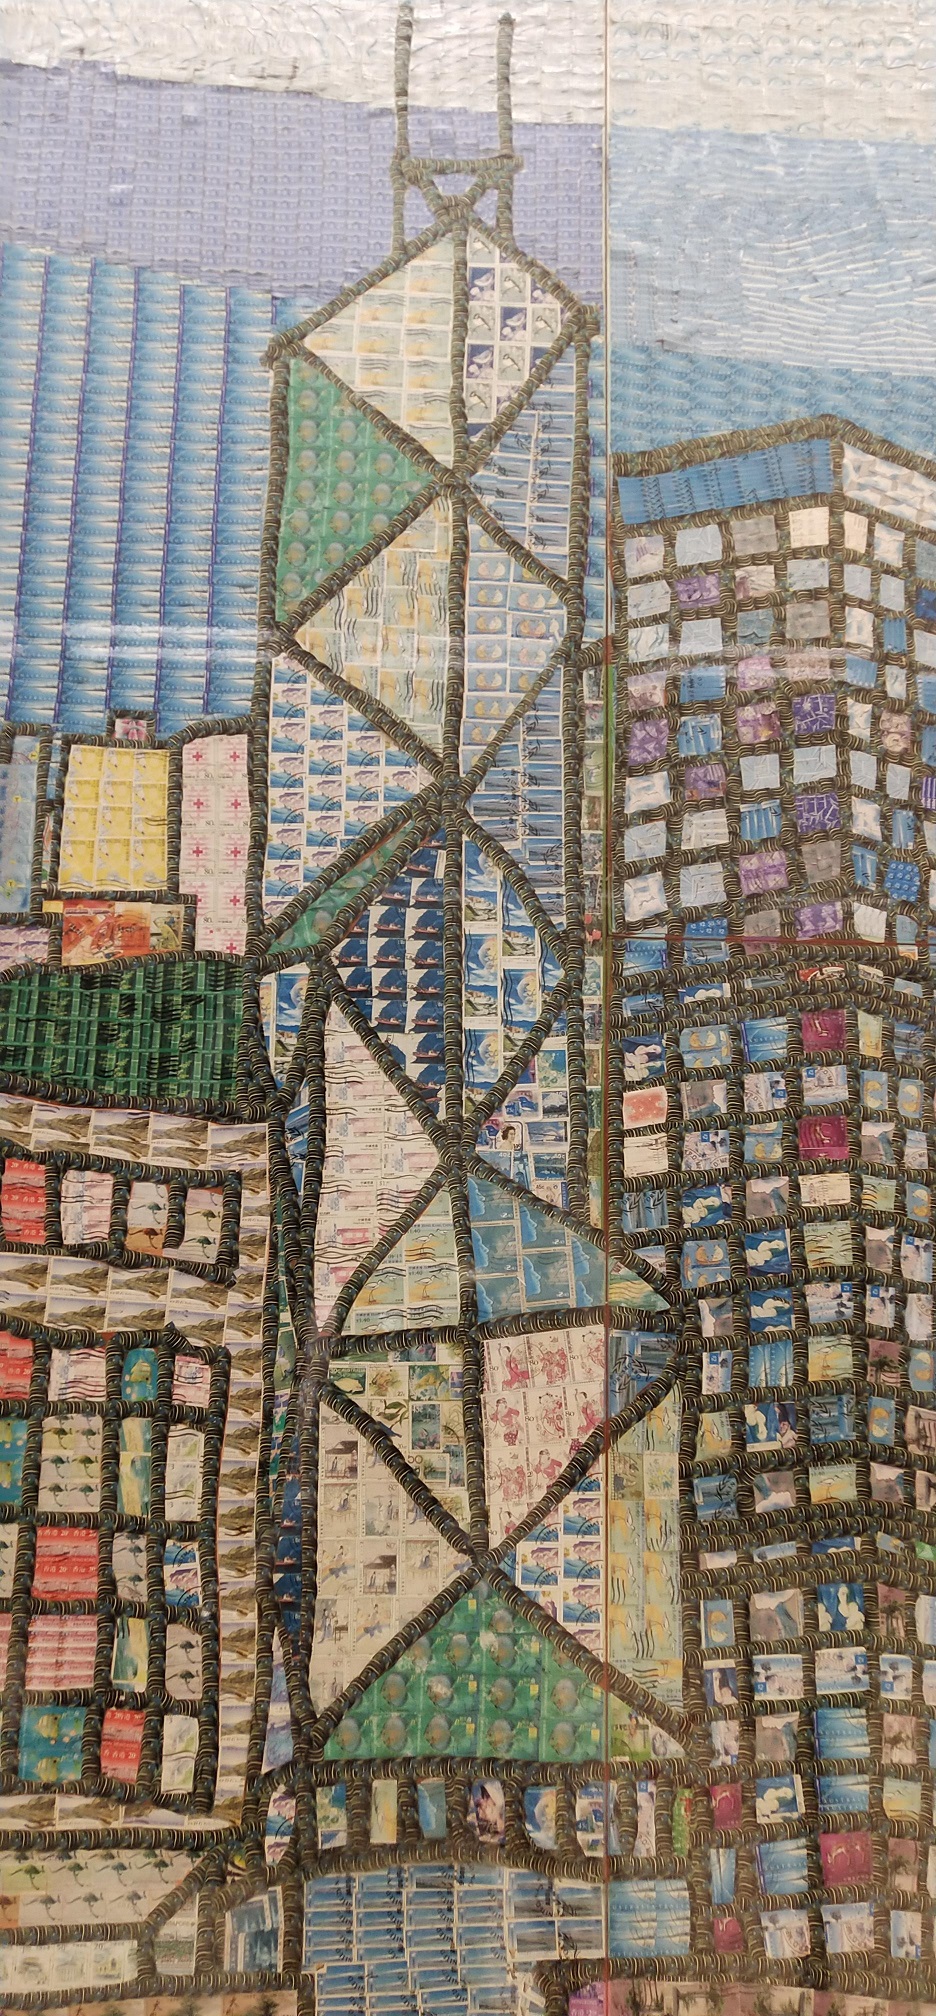 Bank of China in the mosaic by stamp